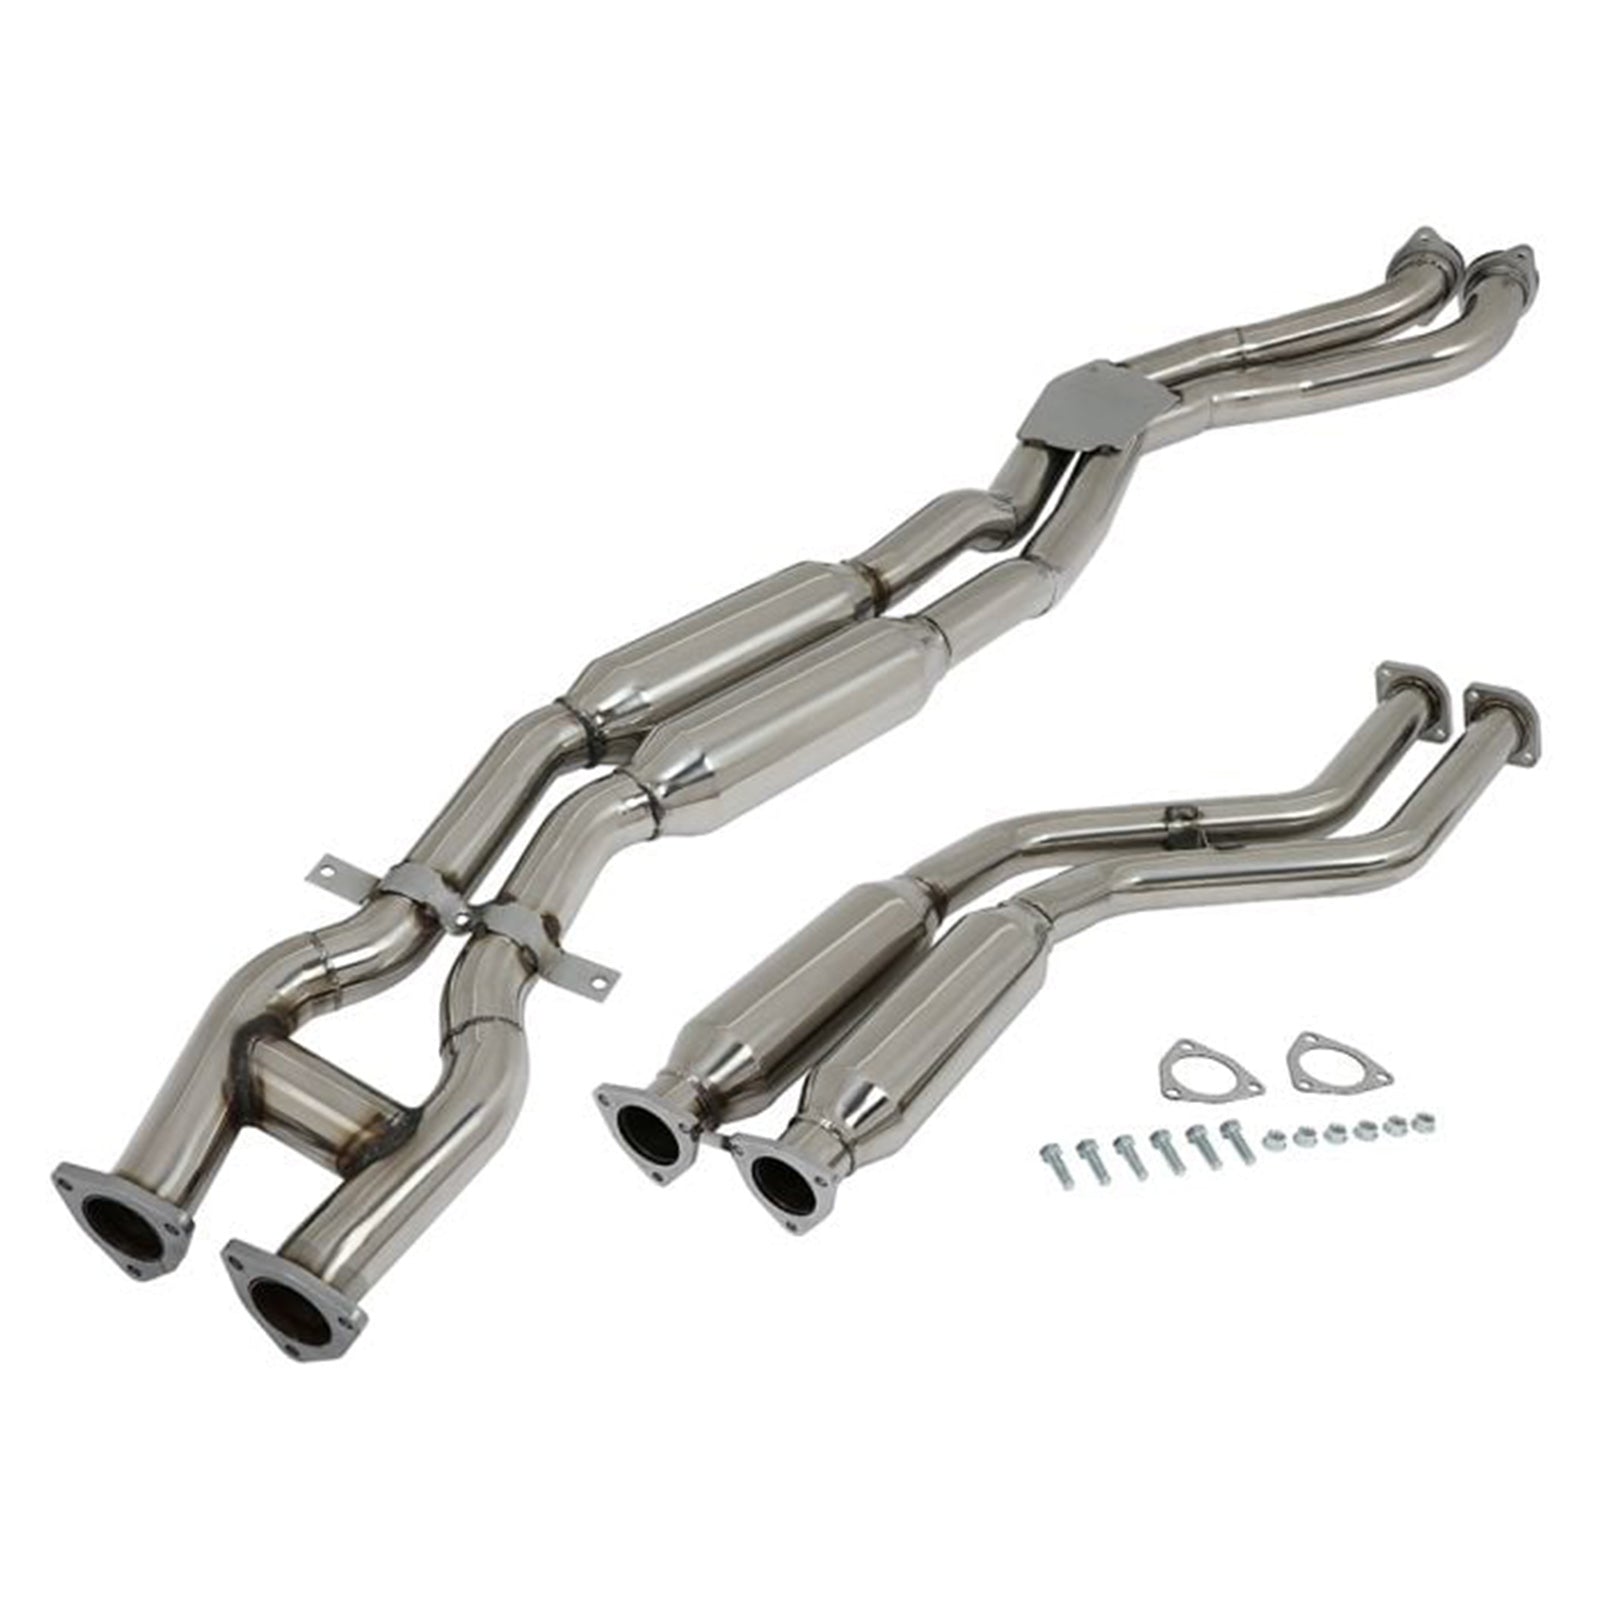 BMW 1999 2001 2003-2006 M3 3.2L Catback Exhaust System Down Pipe Rounded Front Pipe Muffler